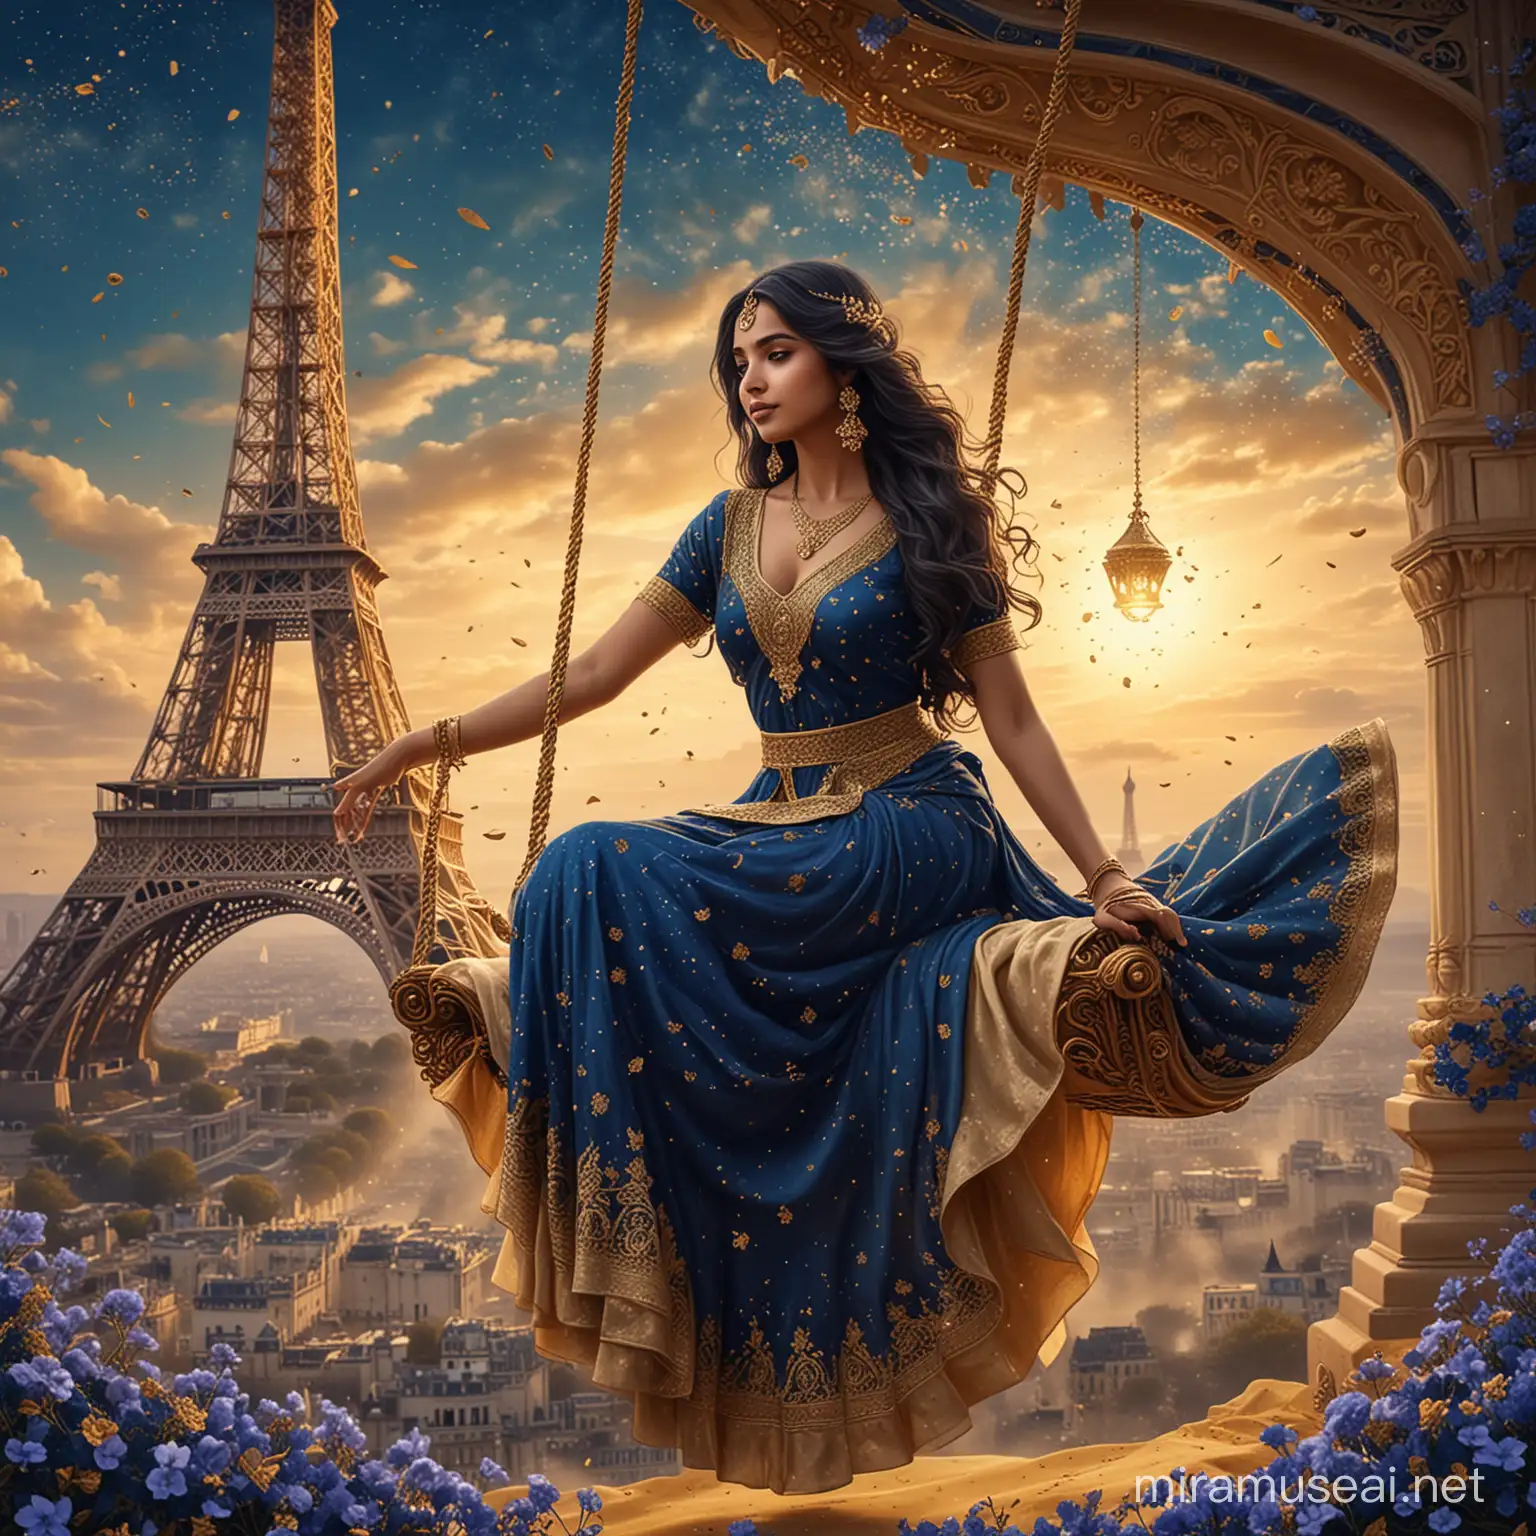 An indian princess, holding a  majestic fan, sitting on a golden swing, surrounded by small dark blue flowers and golden dust. Golden ground. Long wavy black hair. Elegant long beige and dark blue dress, haute couture, sari dress. Background tower effel. Background golden dust, nebula sky with golden light. 8k, fantasy, illustration, digital art, illustration art, fantasy art, fantasy style